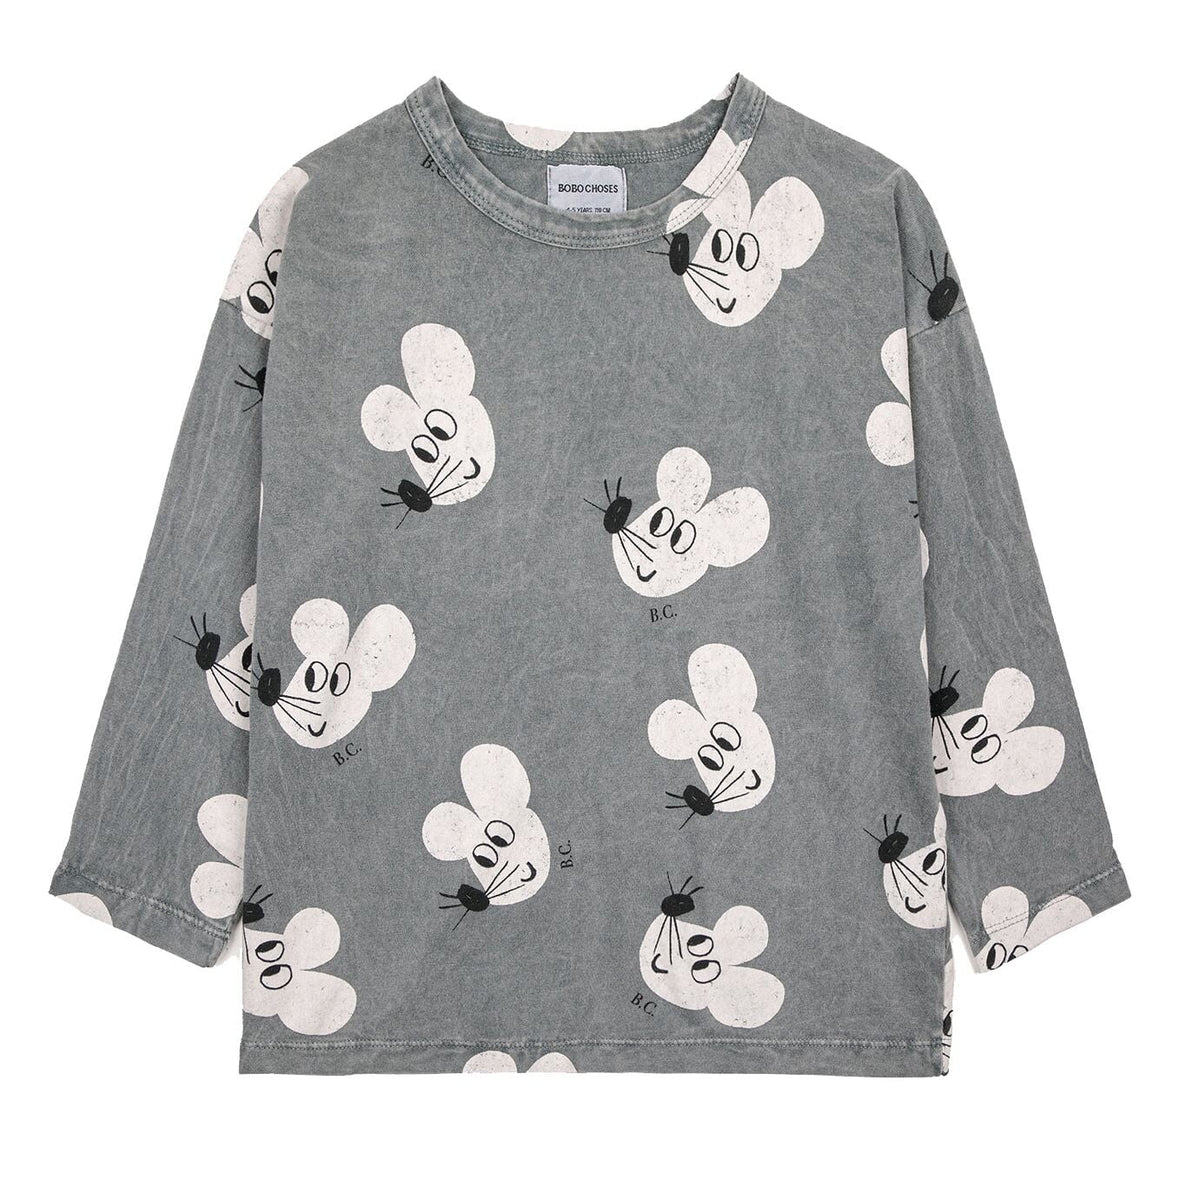 Mouse All Over Long Sleeve T-Shirt